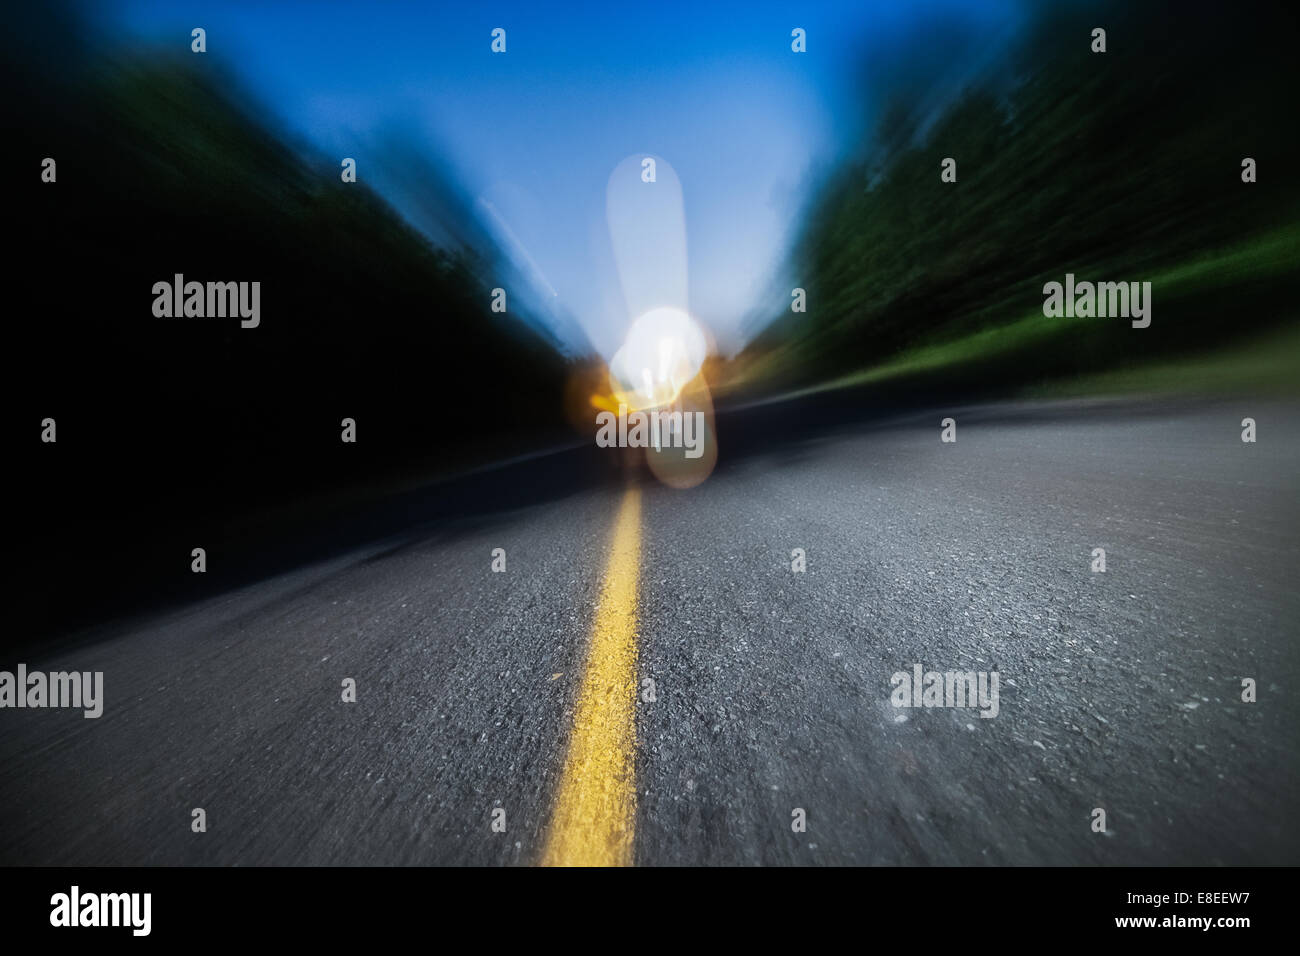 Drunk Driving, Speeding, Being too Tired to Drive are Potential Concepts for This Image of Blurry Road at Night Stock Photo